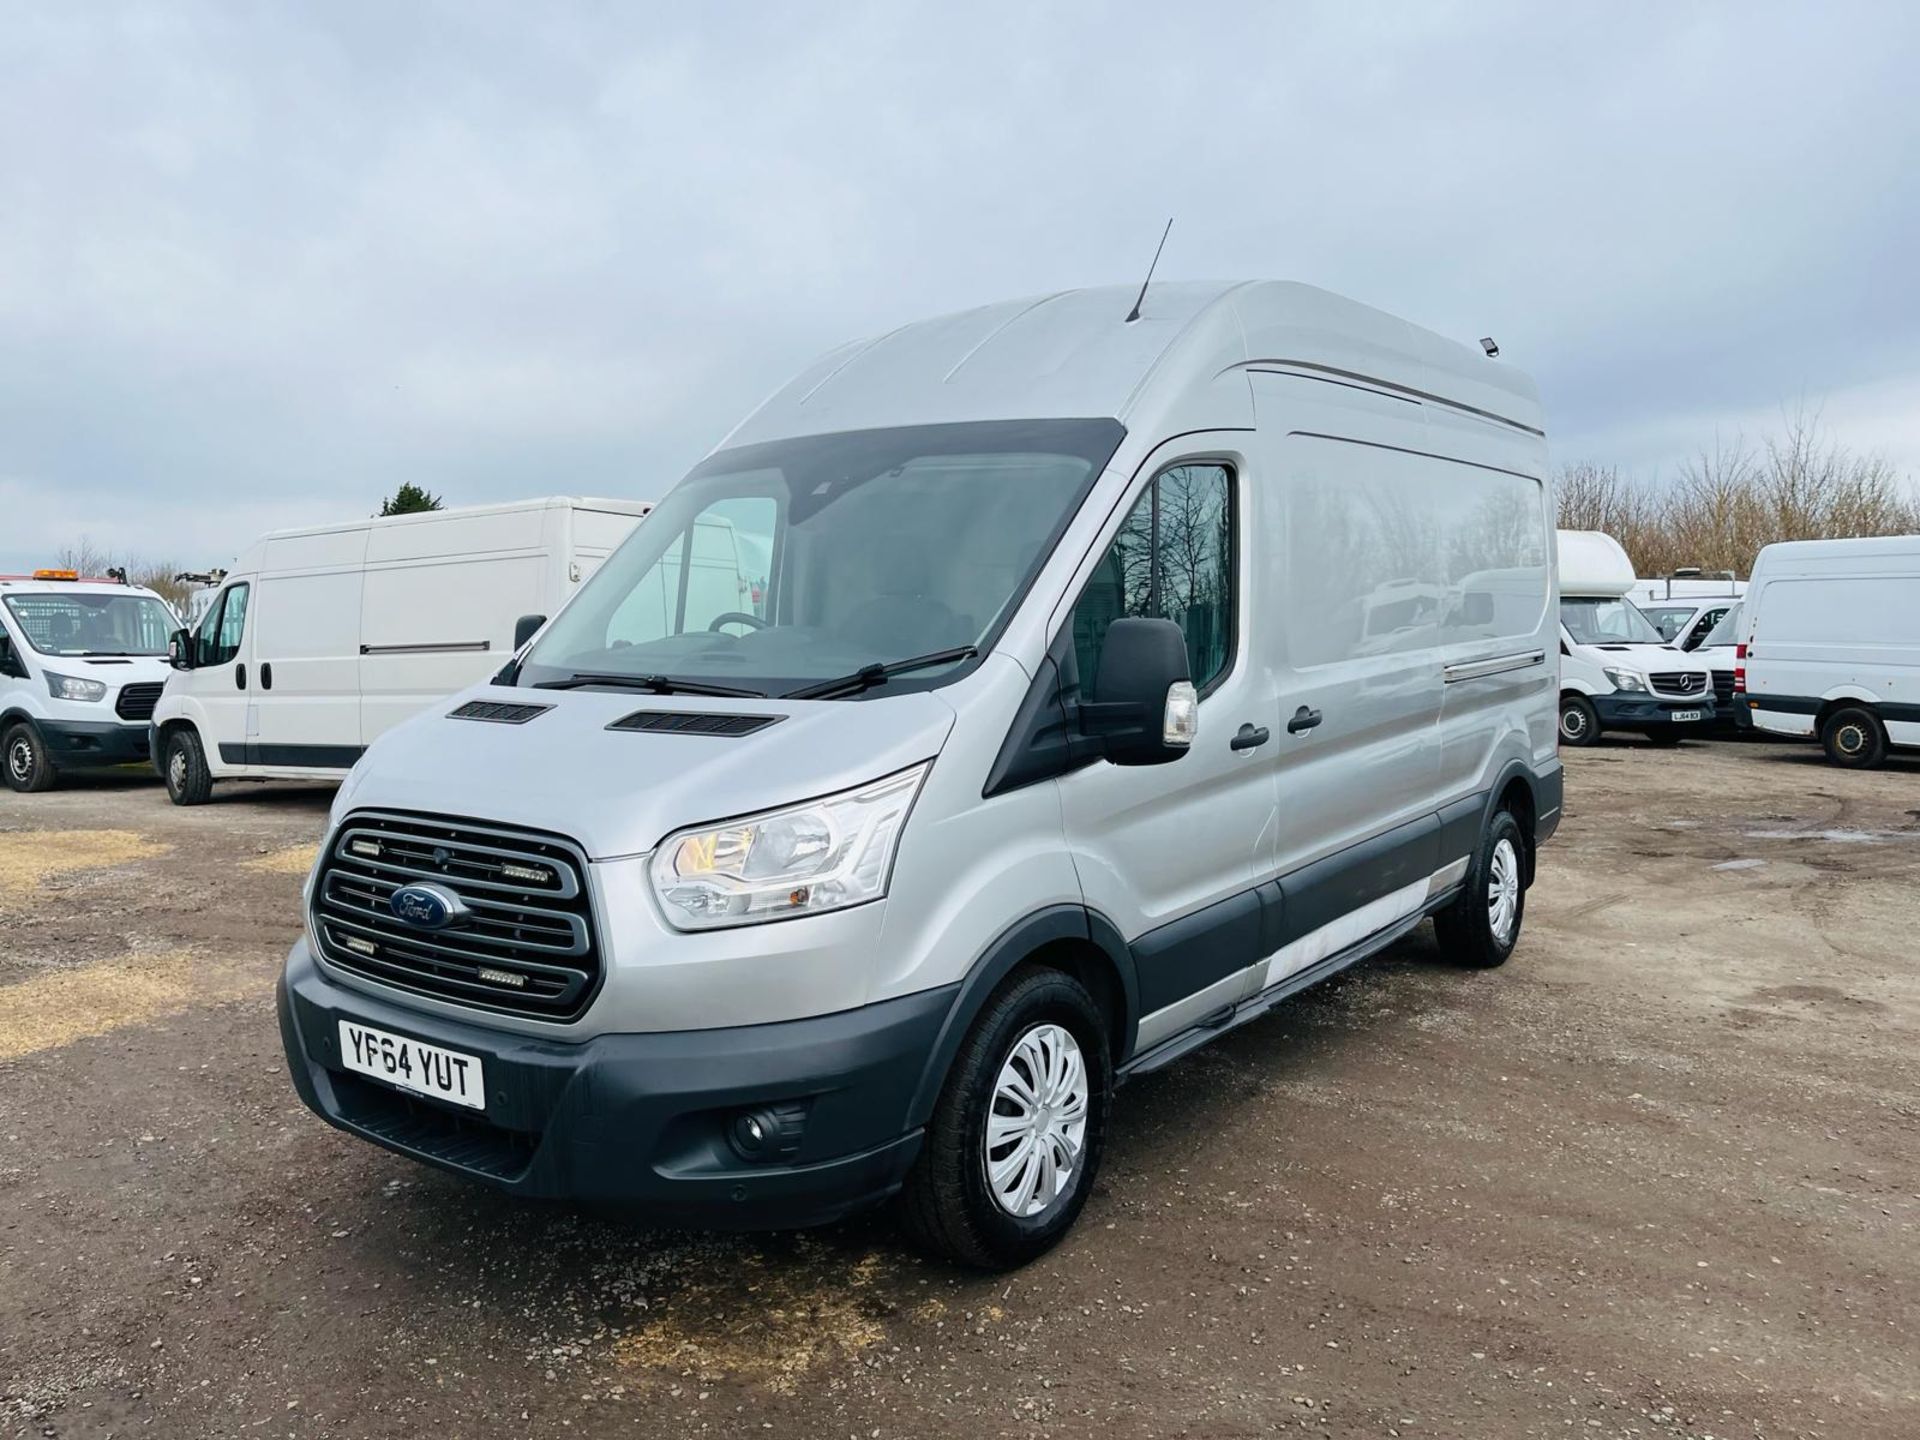 ** ON SALE ** Ford Transit Trend 350 TDCI 125 2.2 L3 H3 2014 '64 Reg' - Parking sensors - Air Con - Image 3 of 27